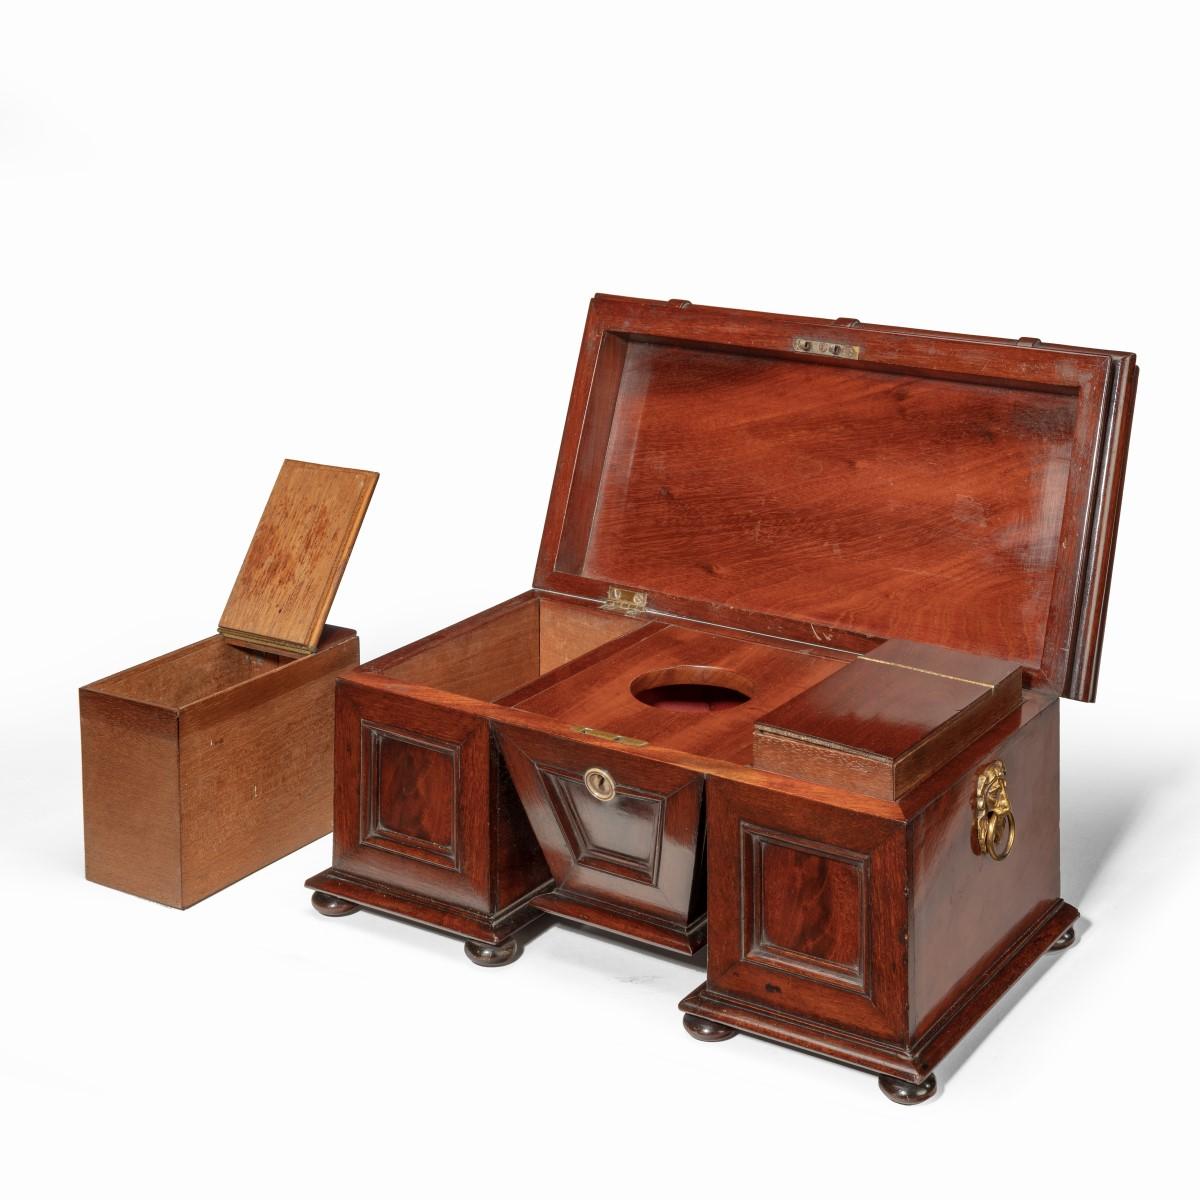 An unusual William IV mahogany tea caddy in the form of a pedestal sideboard with a hinged lid opening to reveal a central well for a mixing bowl (now missing) flanked by two removable tea containers, all raised on bun feet and with applied brass